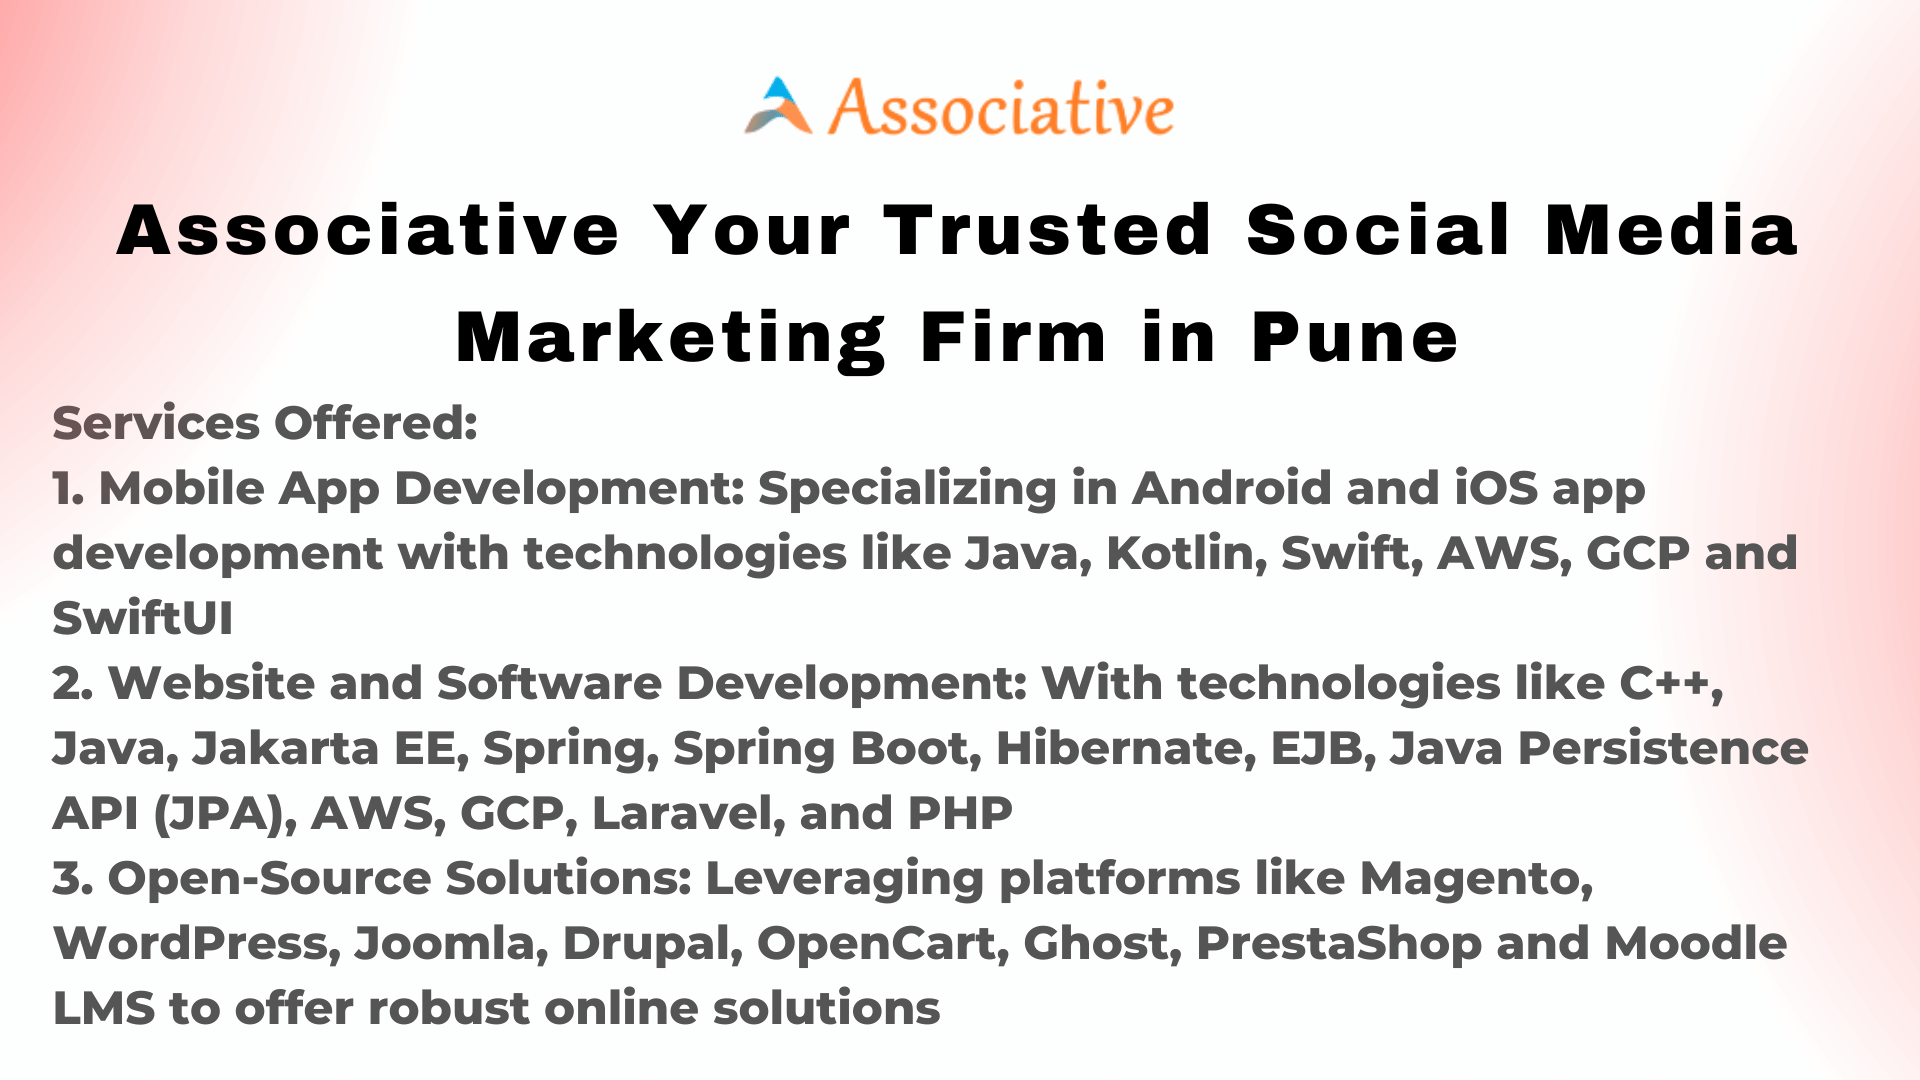 Associative Your Trusted Social Media Marketing Firm in Pune